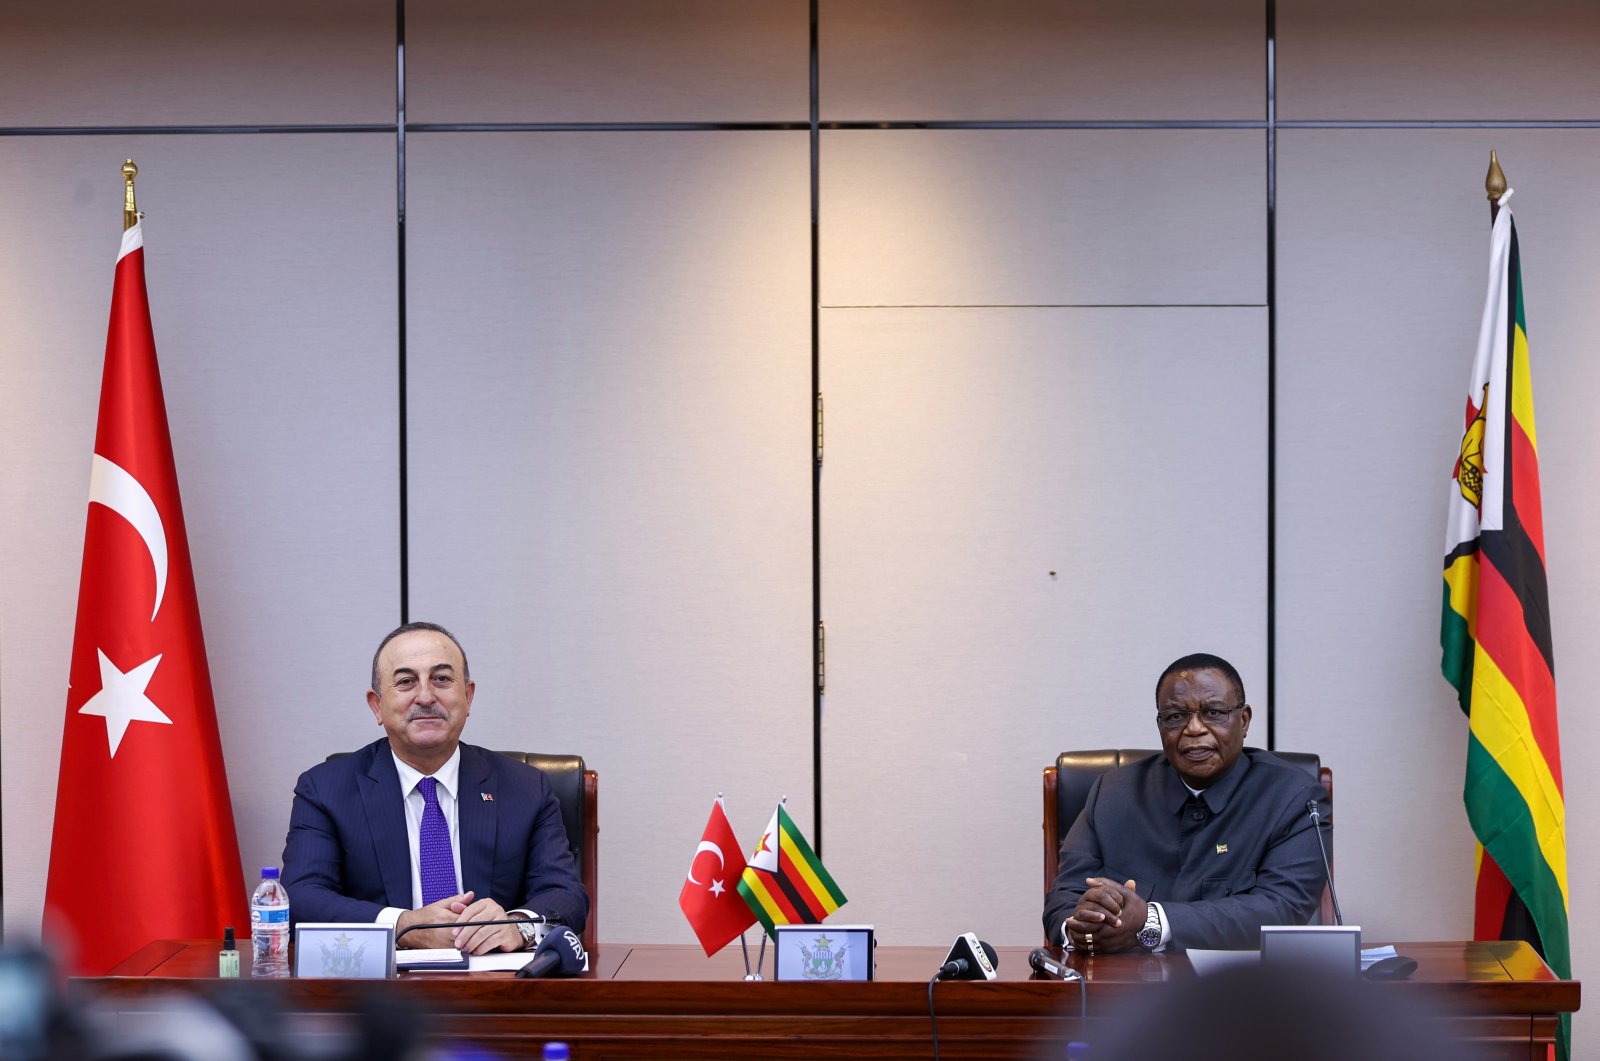 Foreign Minister Mevlüt Çavuşoğlu and his Zimbabwean counterpart Frederick Shava attend a joint news conference in Harare, Jan. 11, 2022. (AA Photo)